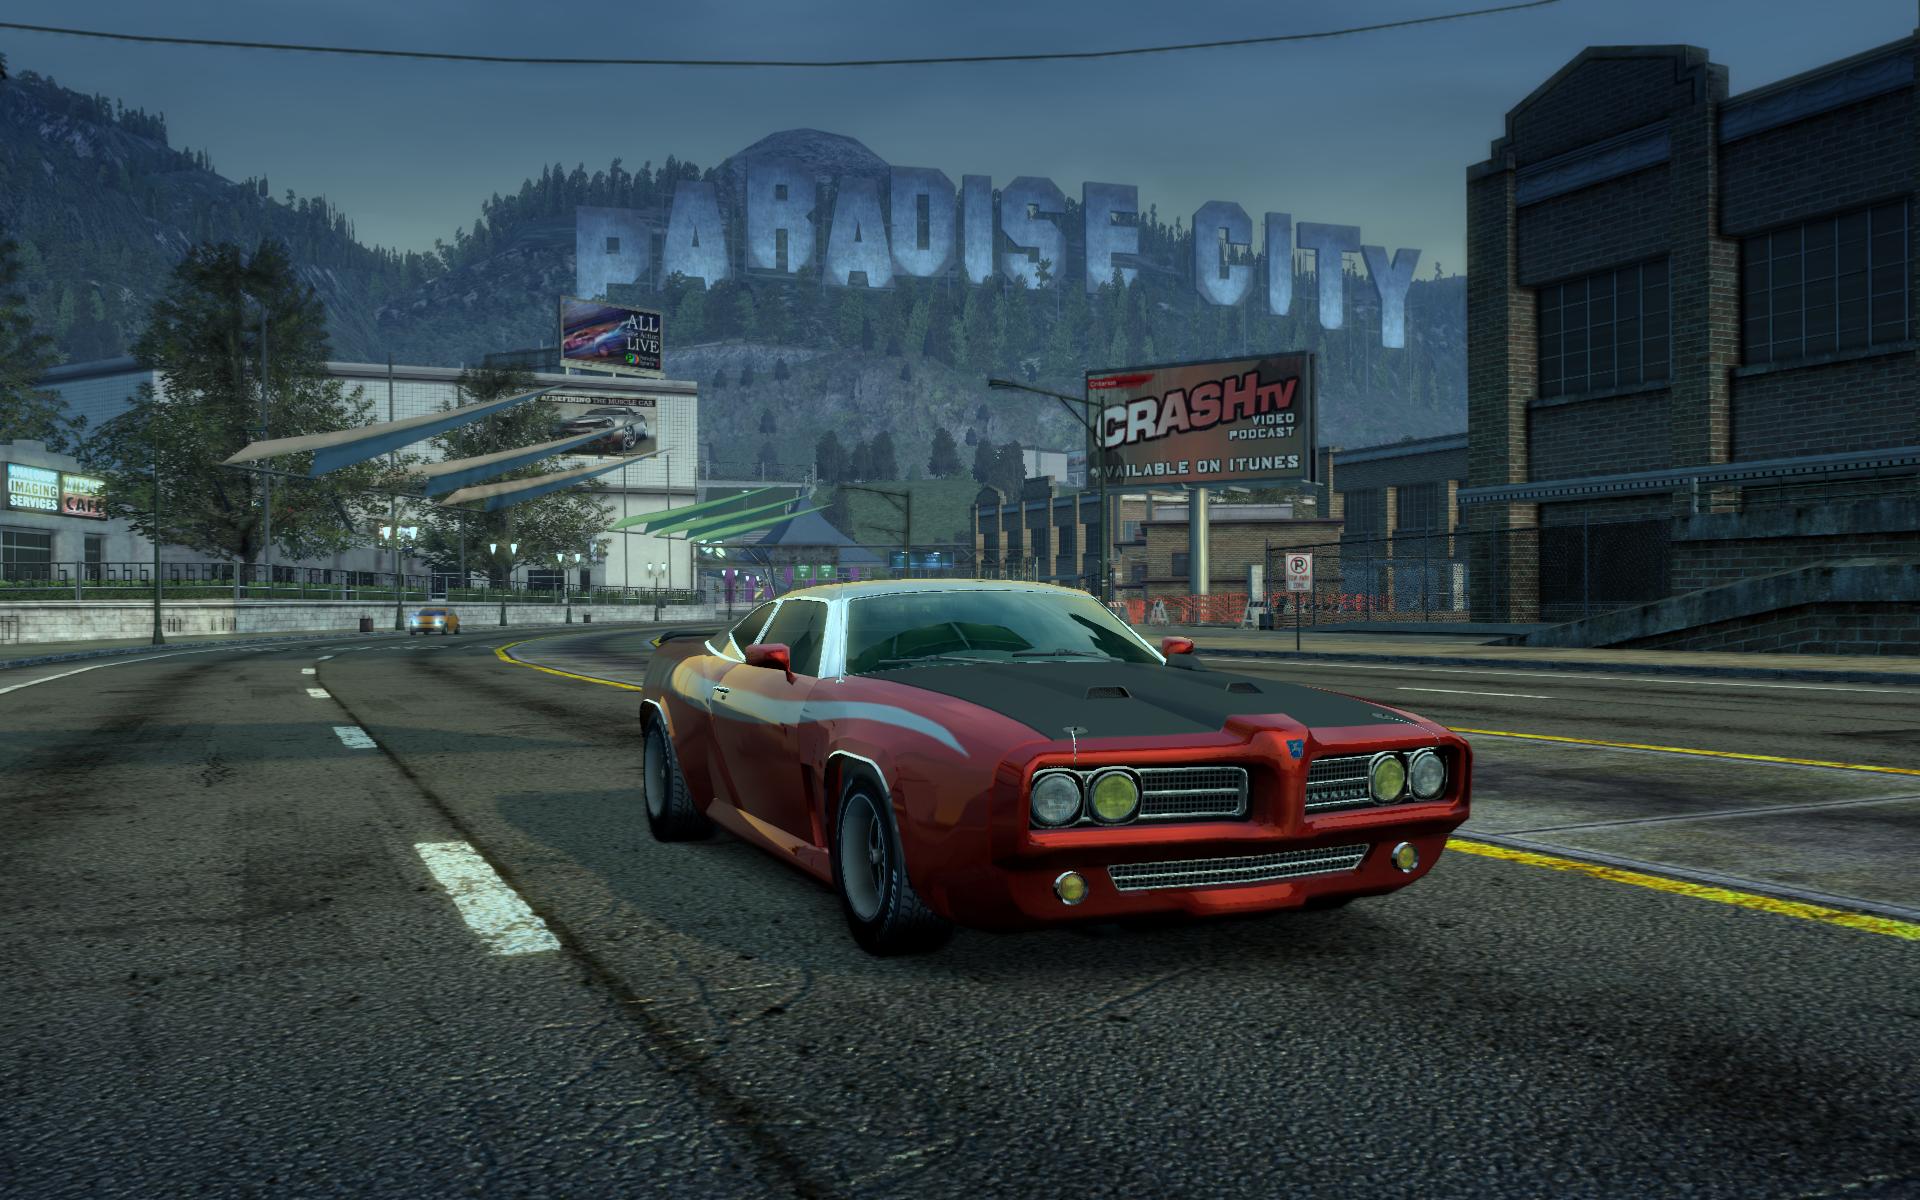 Burnout Paradise is being remastered and it's coming to PS4